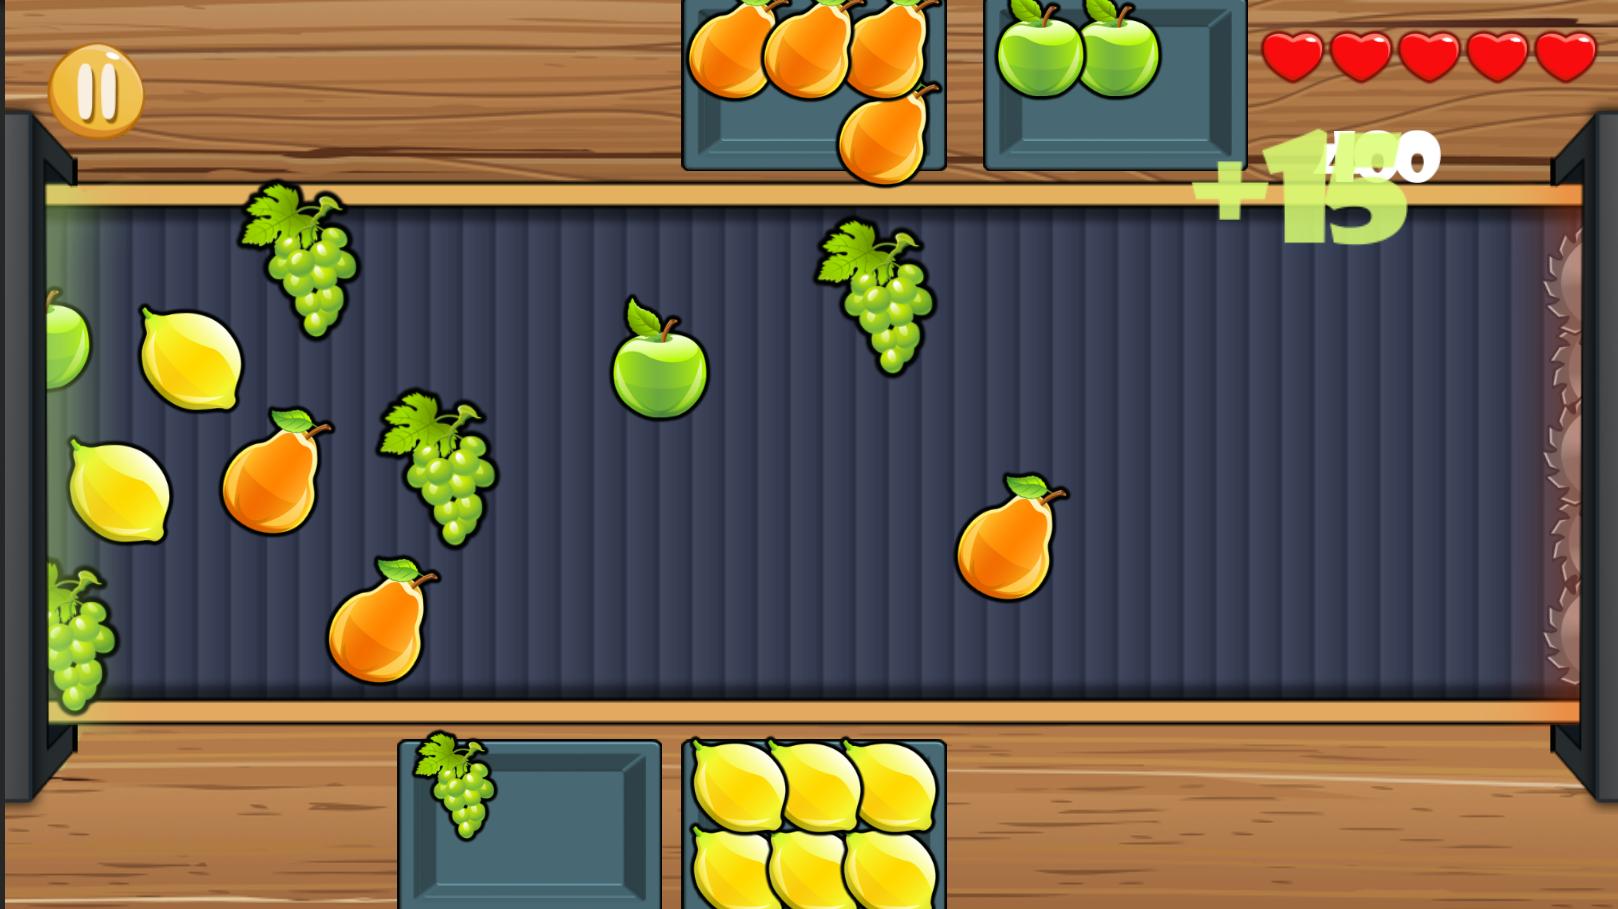 One fruit game